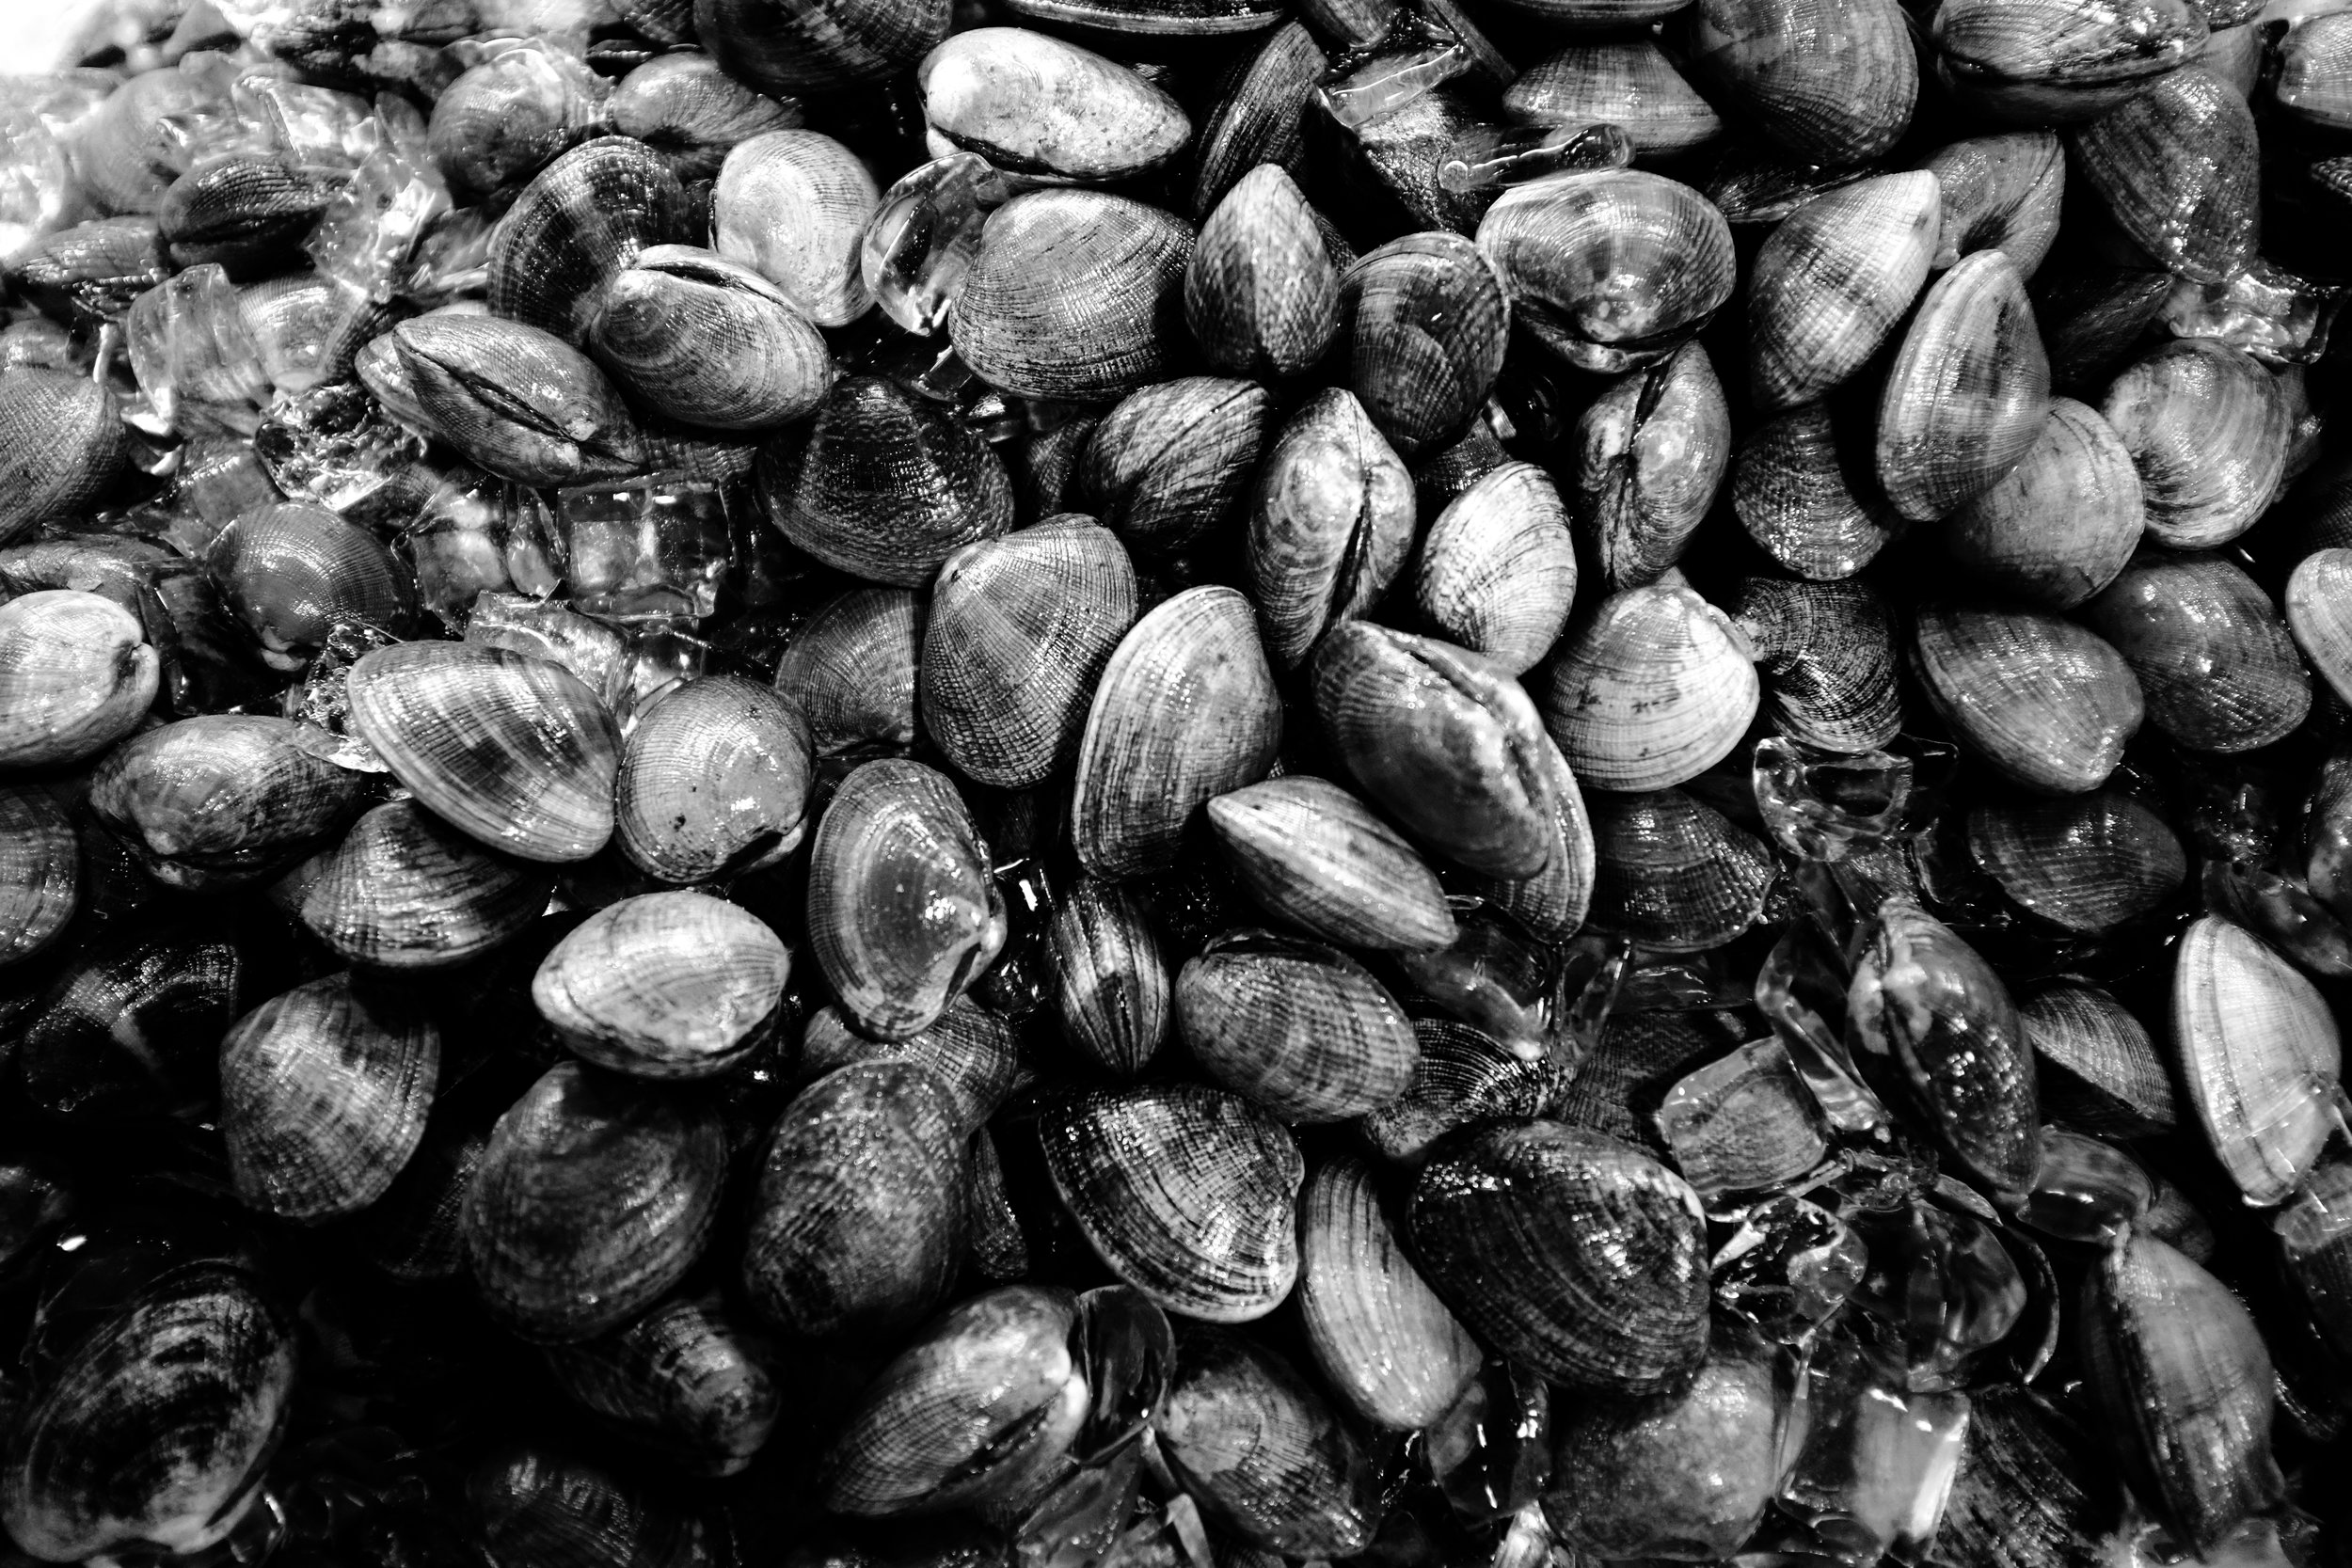 Mussels at the Chinatown market